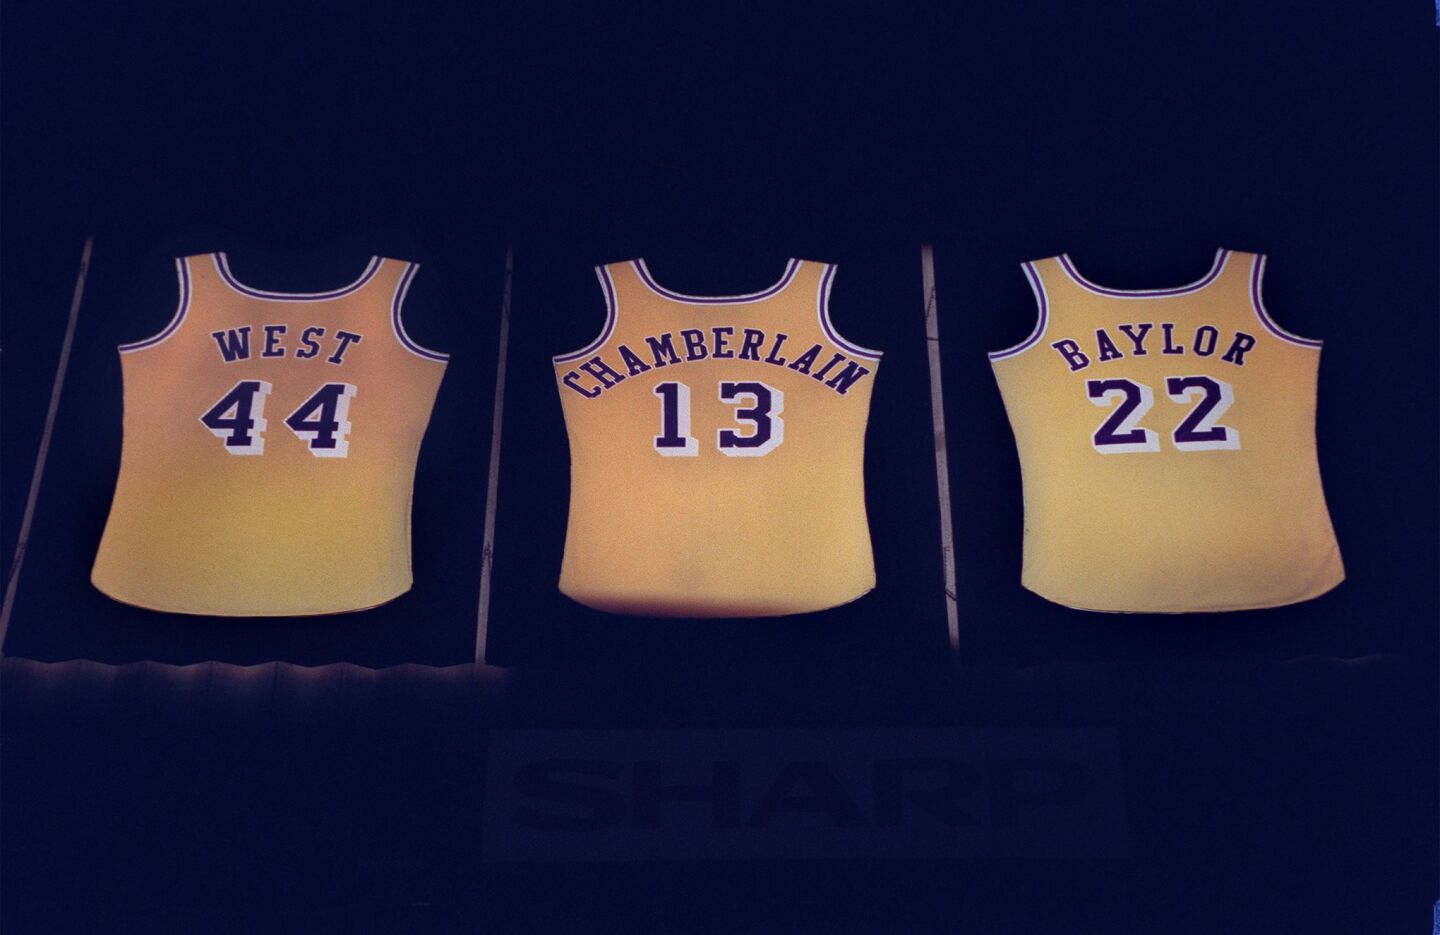 Three of the seven jerseys displayed above the seats of the Great Western Forum honor former Lakers Jerry West, Wilt Chamberlain and Elgin Baylor.